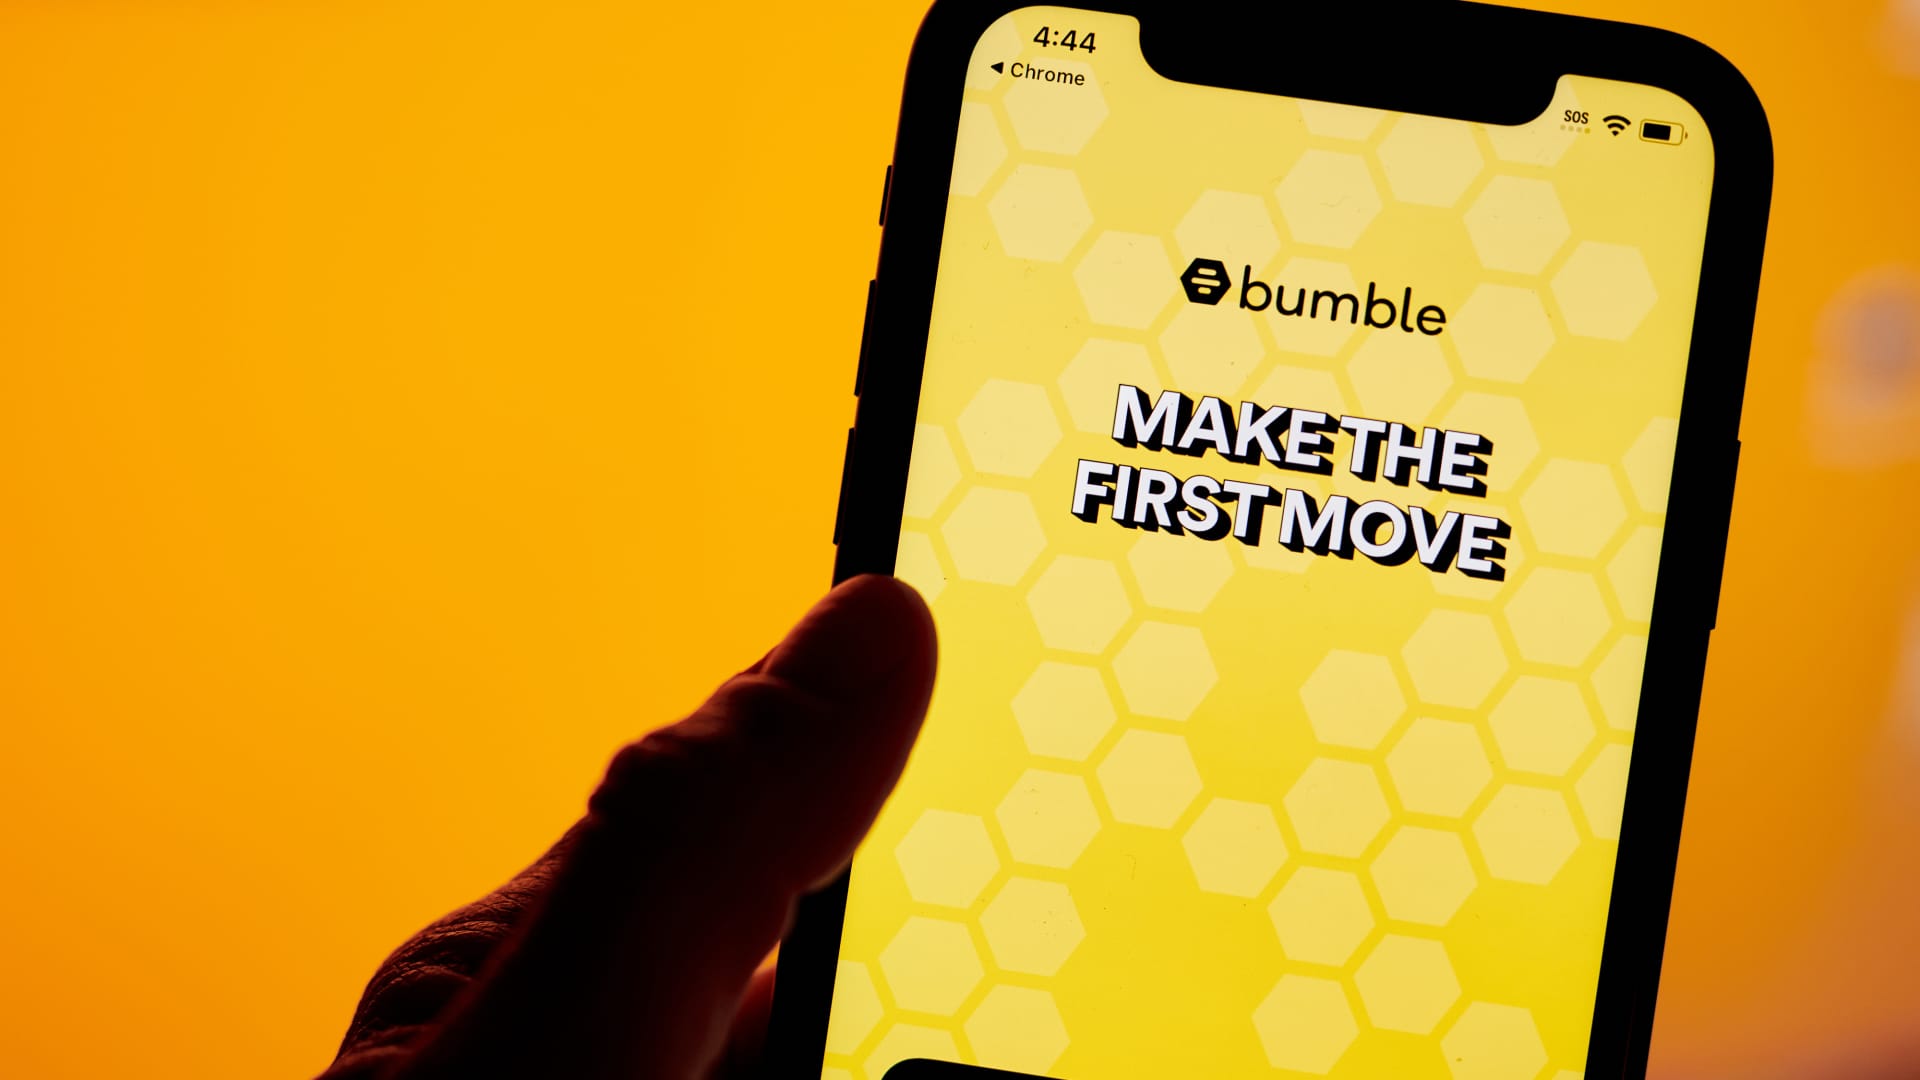 Bumble to lay off 350 employees as tech industry job cuts mount